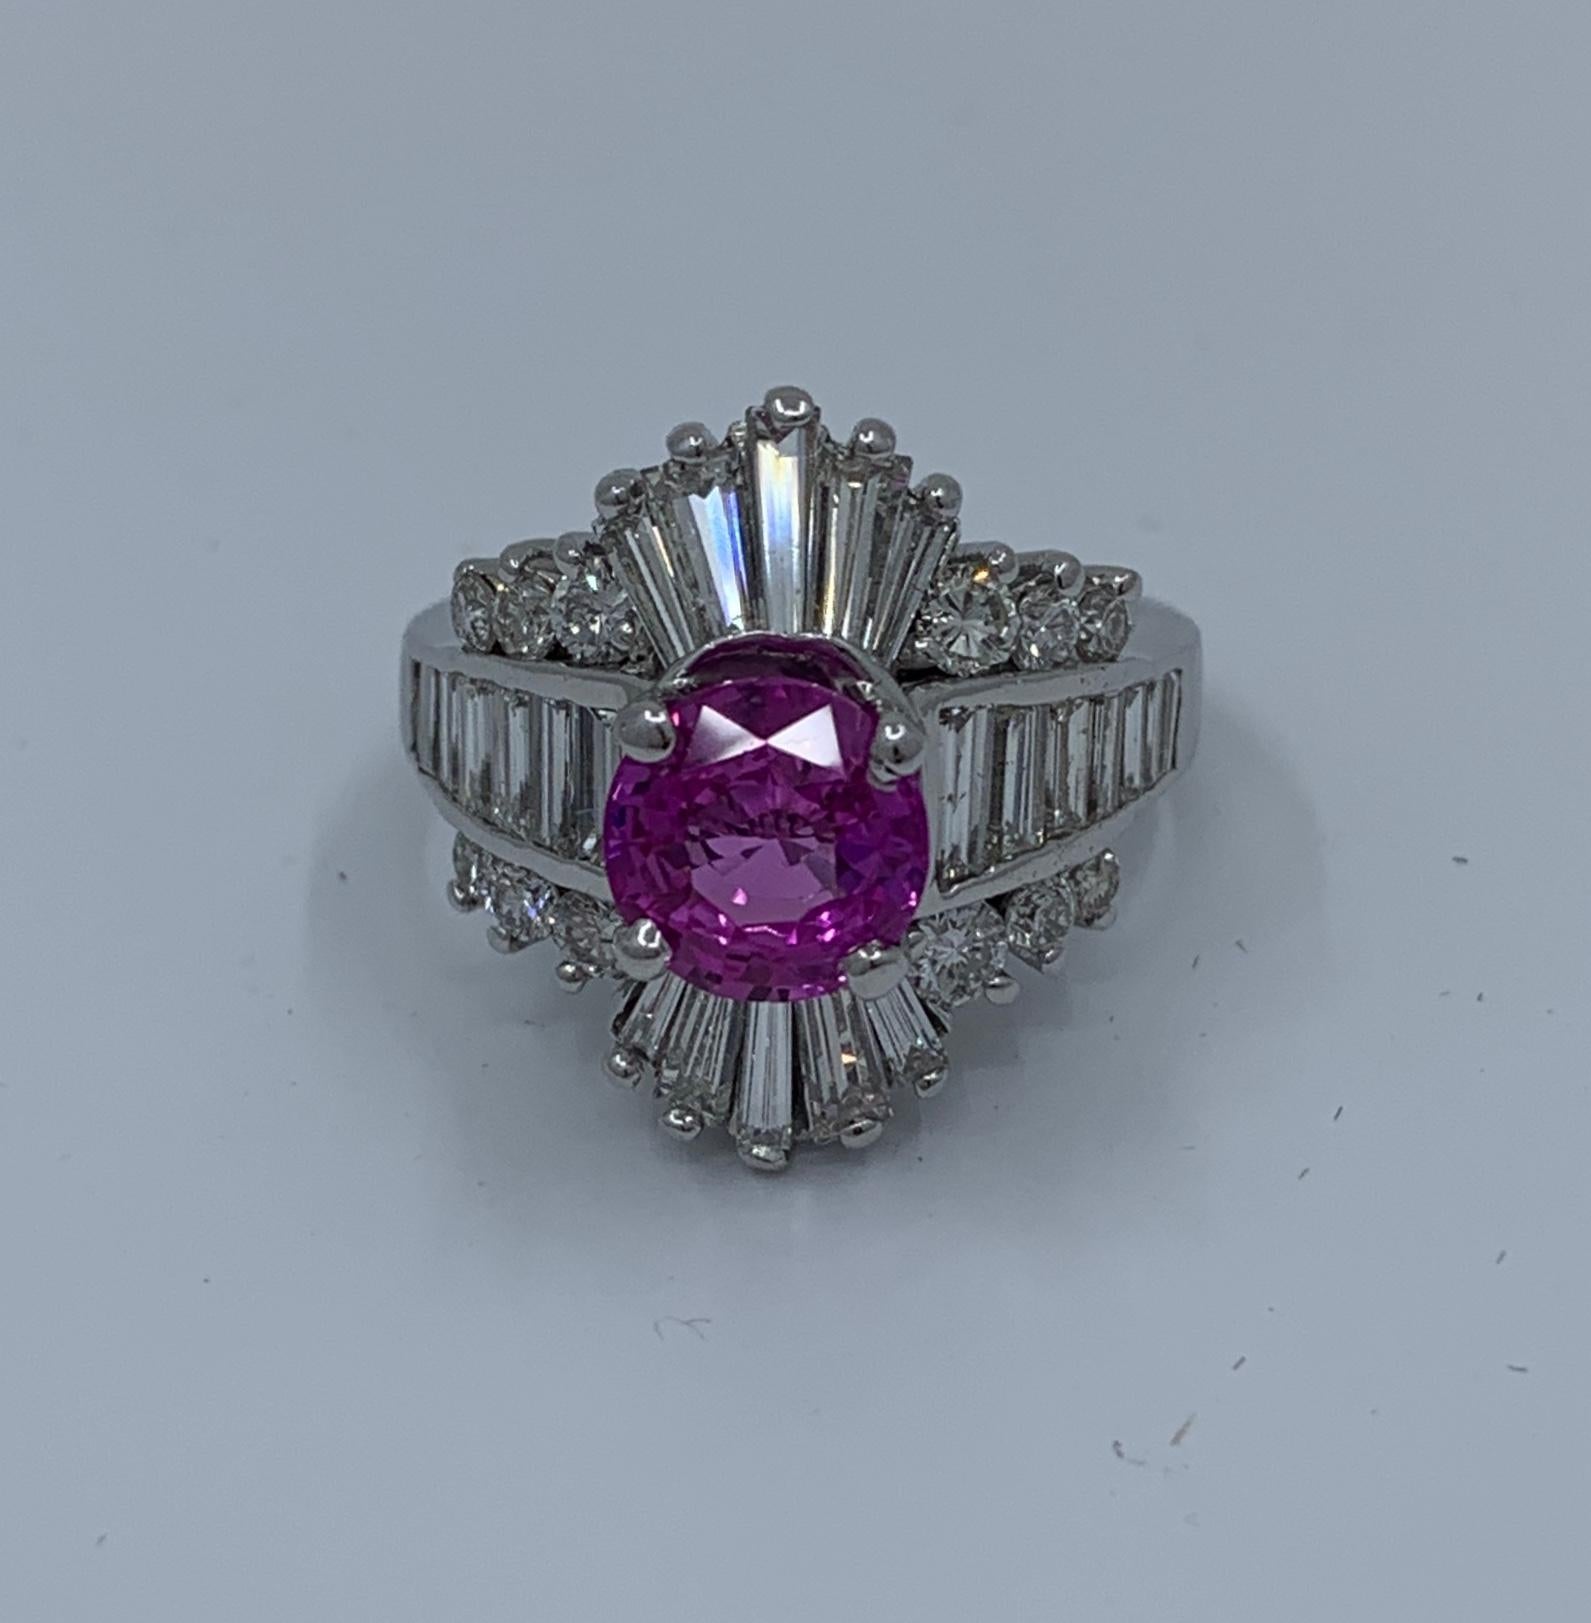 A vivid purplish pink round brilliant cut natural corundum sapphire is GIA Certified and is prong set in 14 karat white gold.   It is surrounded by prong and channel set long tapered and straight baguette diamonds and accented by prong and tension